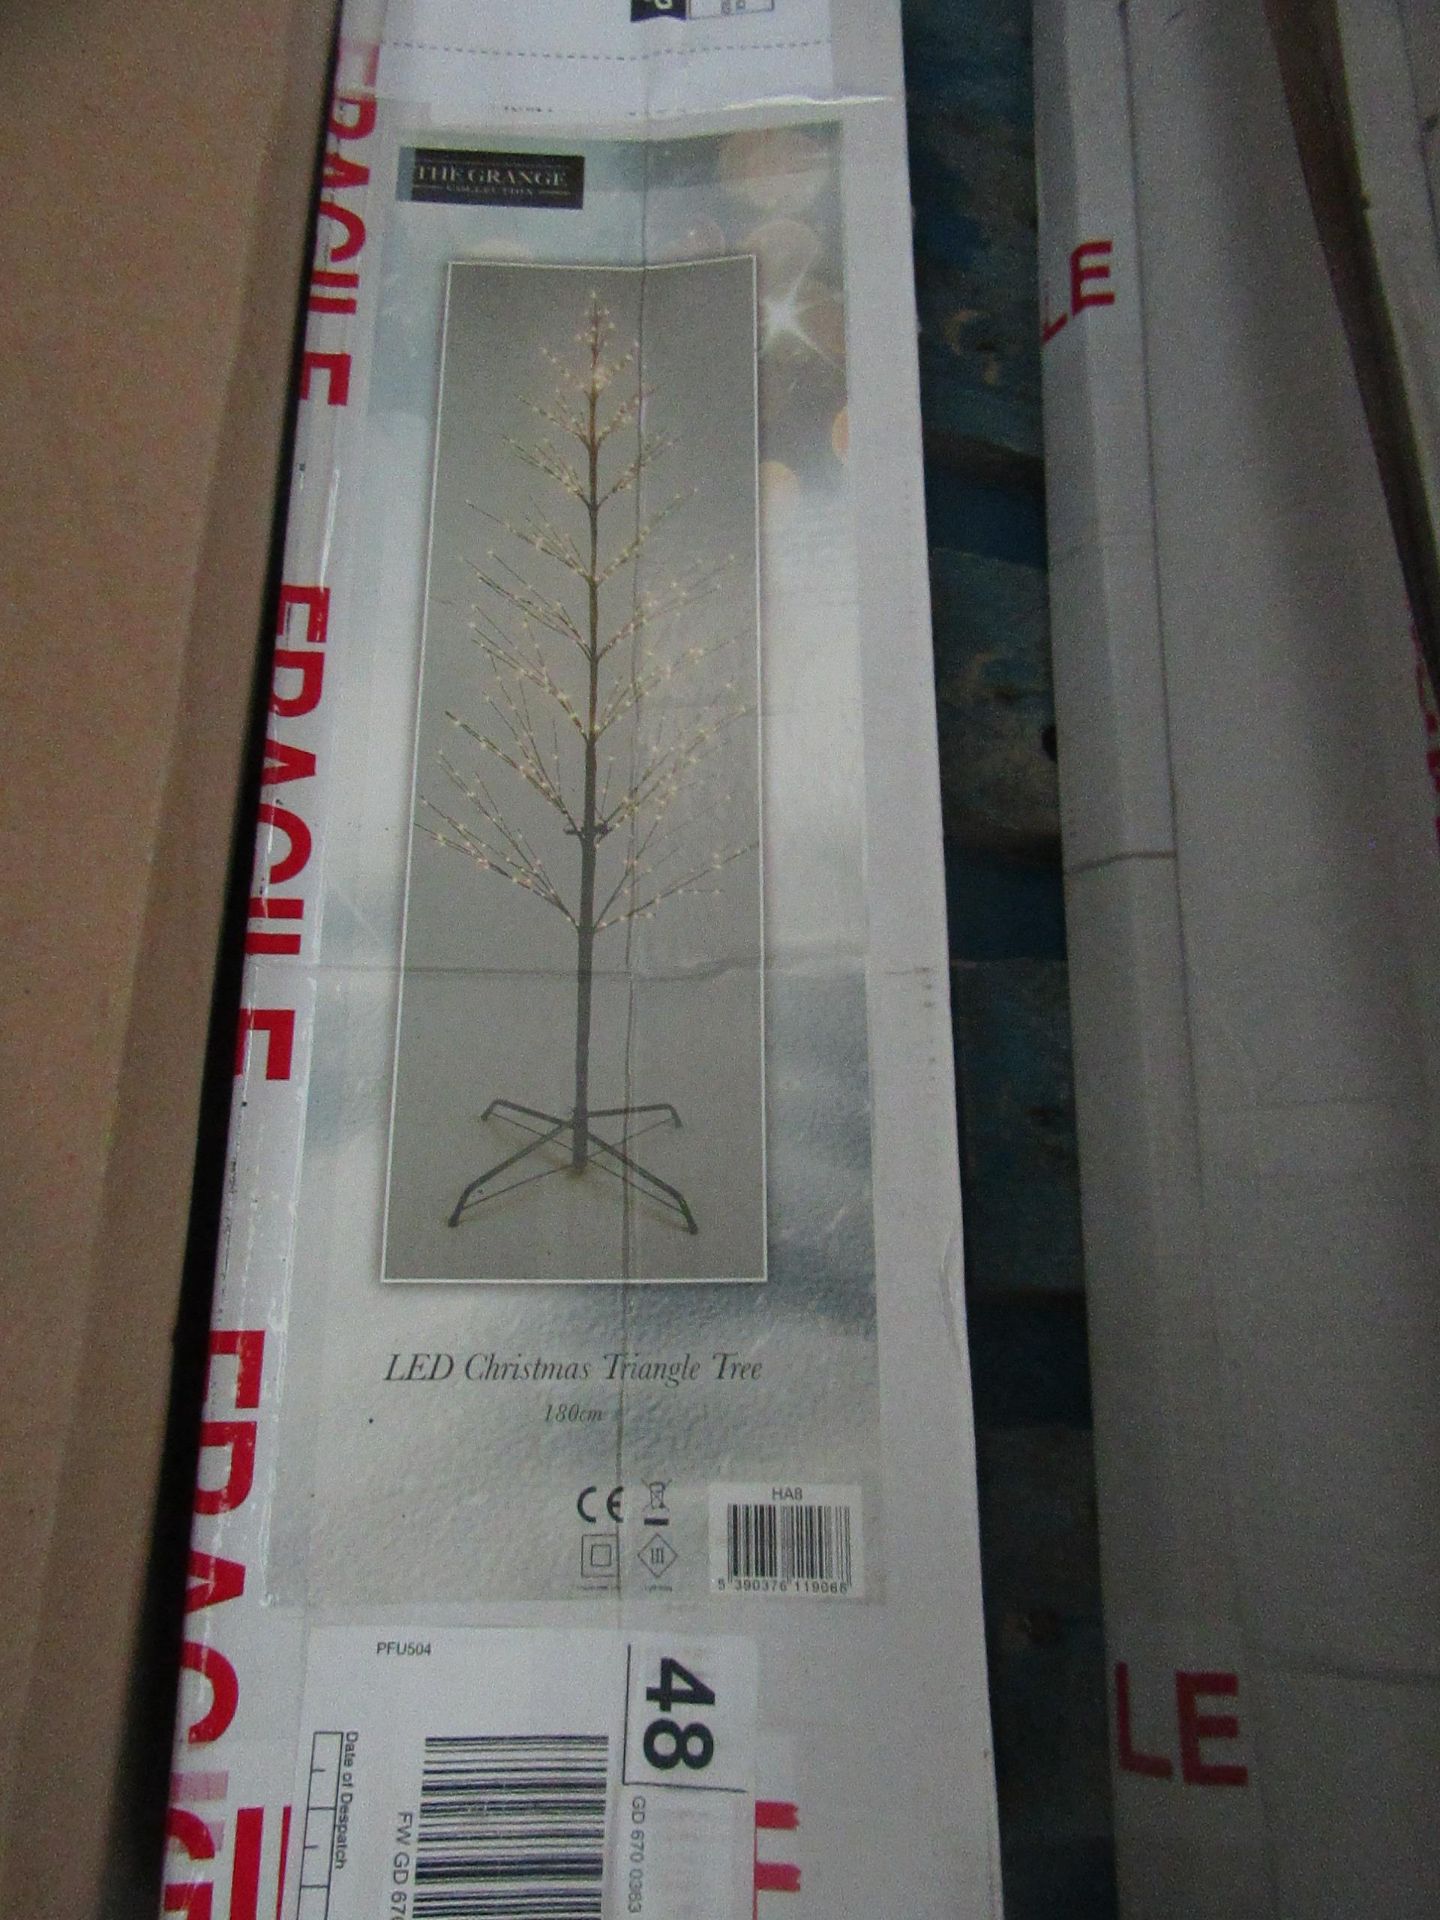 | 1X | THE GRANGE COLLECTION LED CHRISTMAS TRIANGLE TREE | UNCHECKED & BOXED |